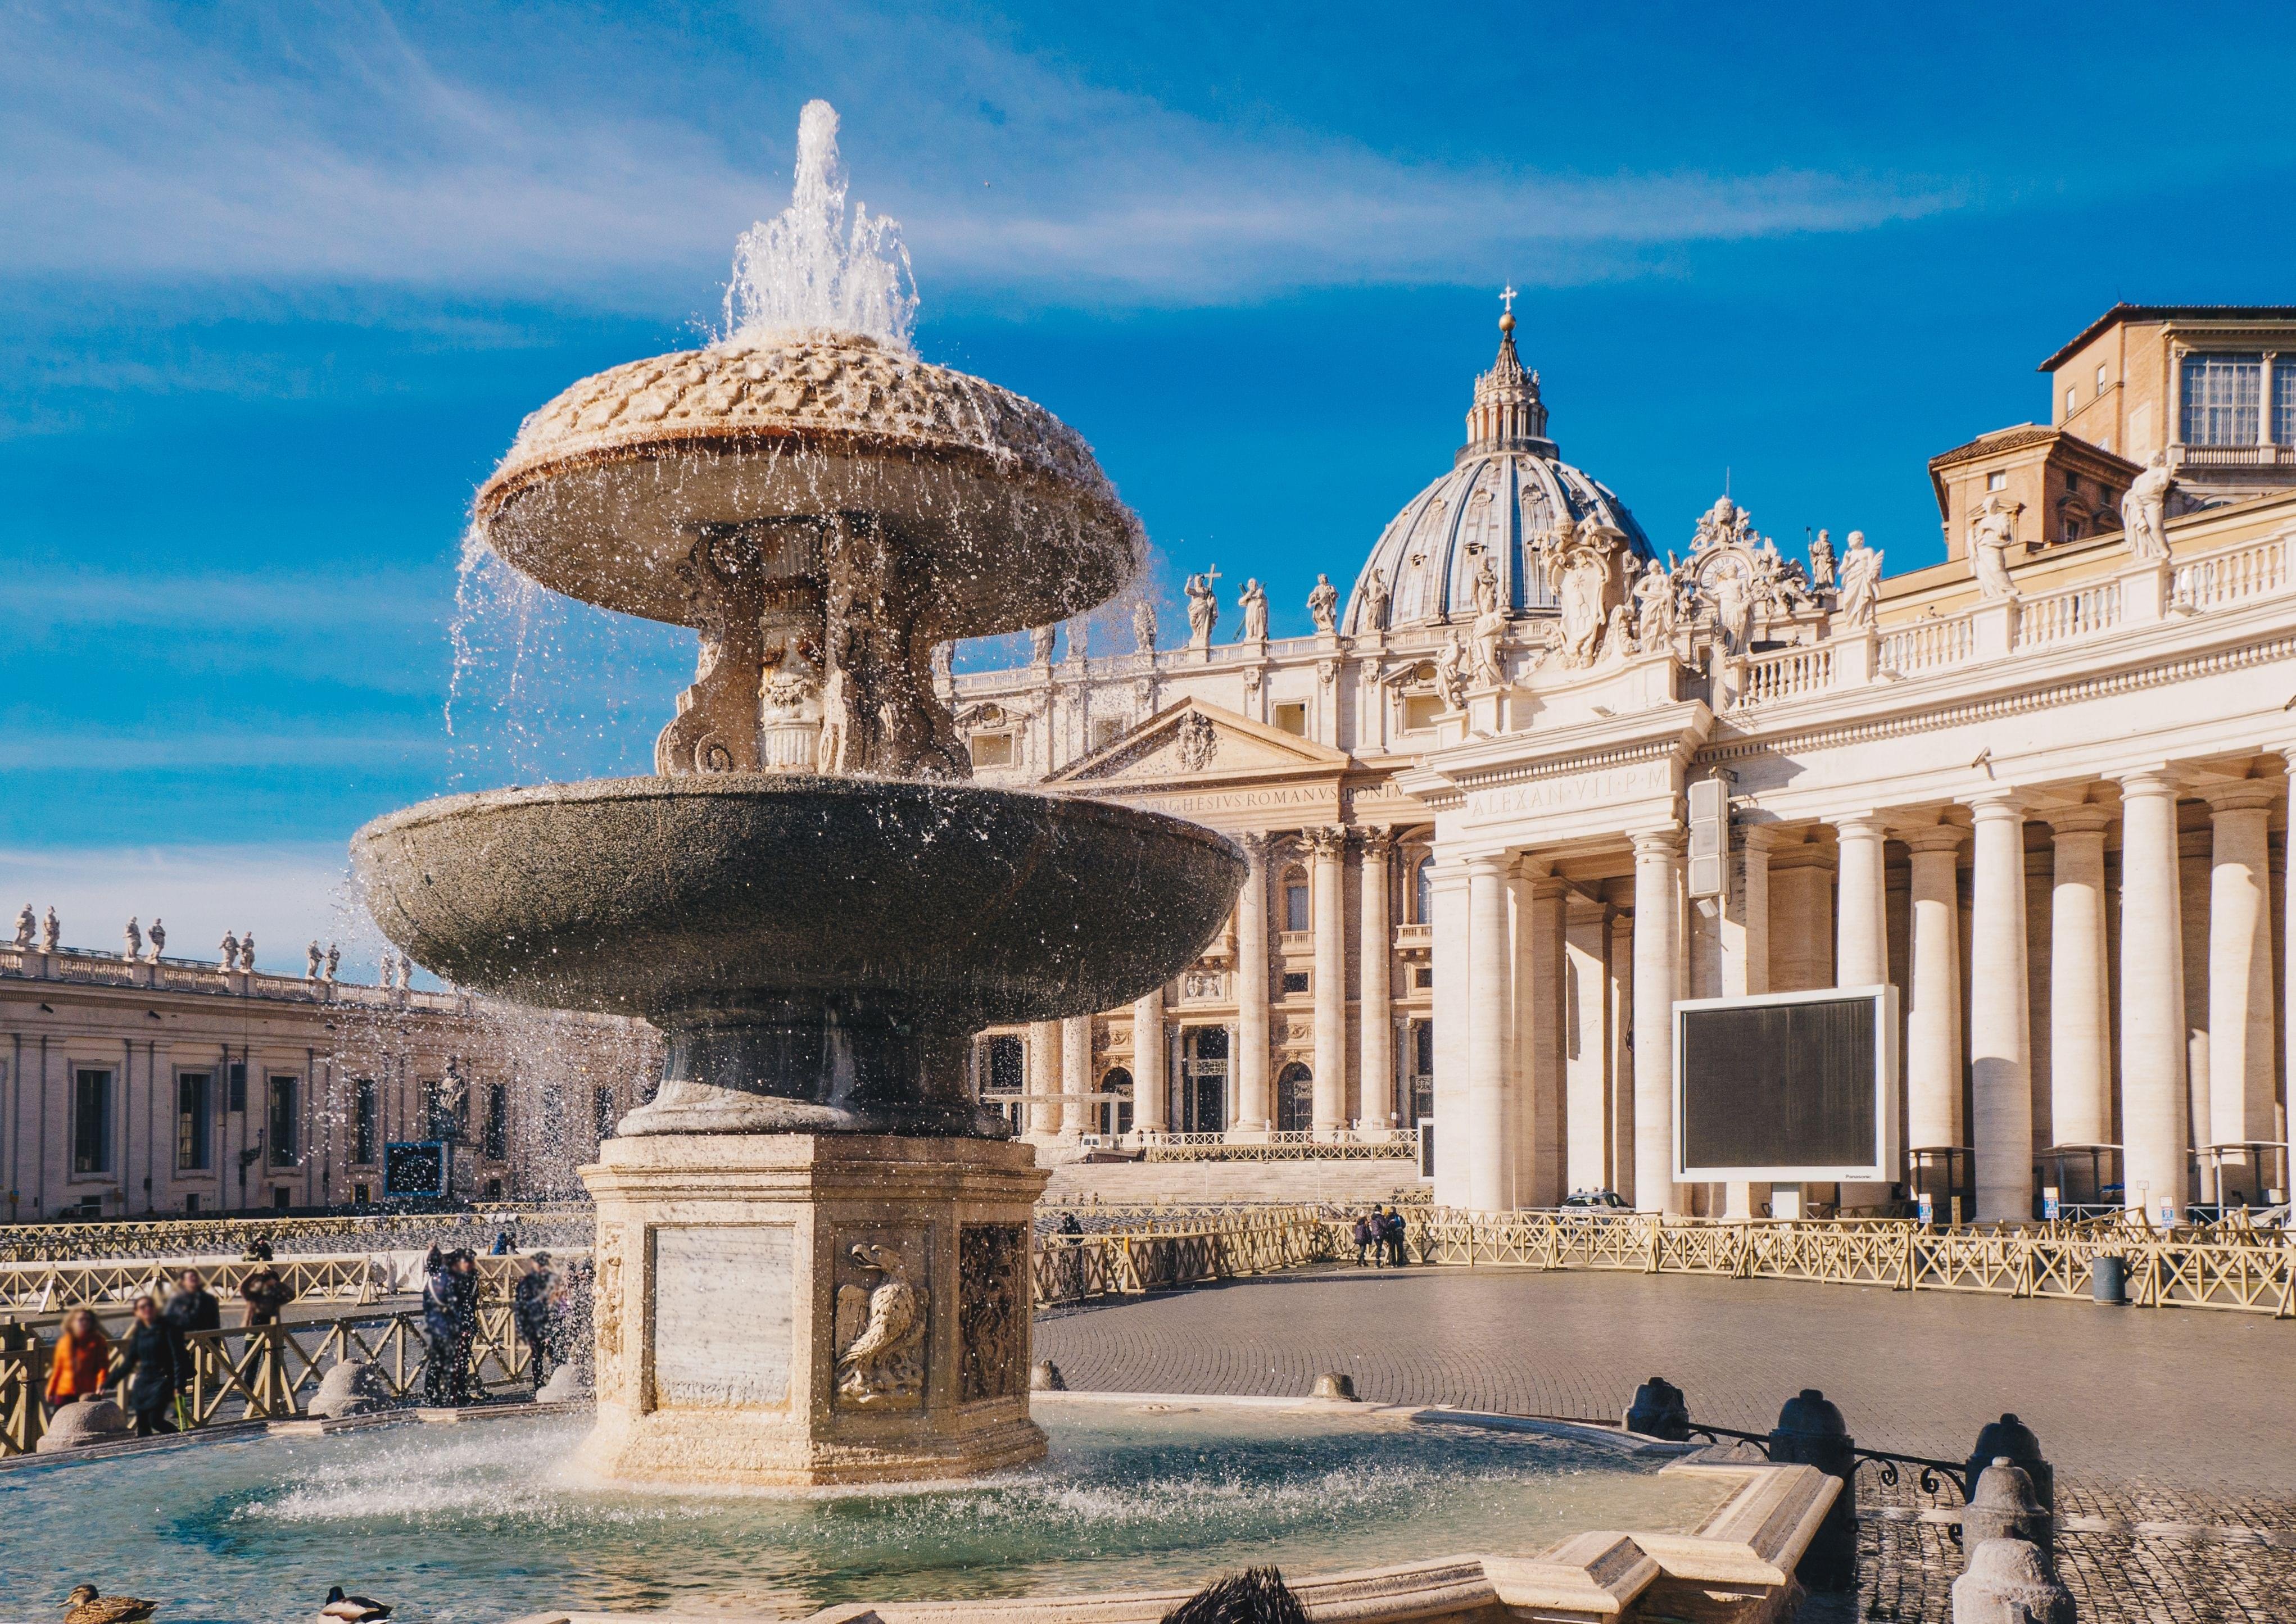 How to Reach St. Peter's Basilica